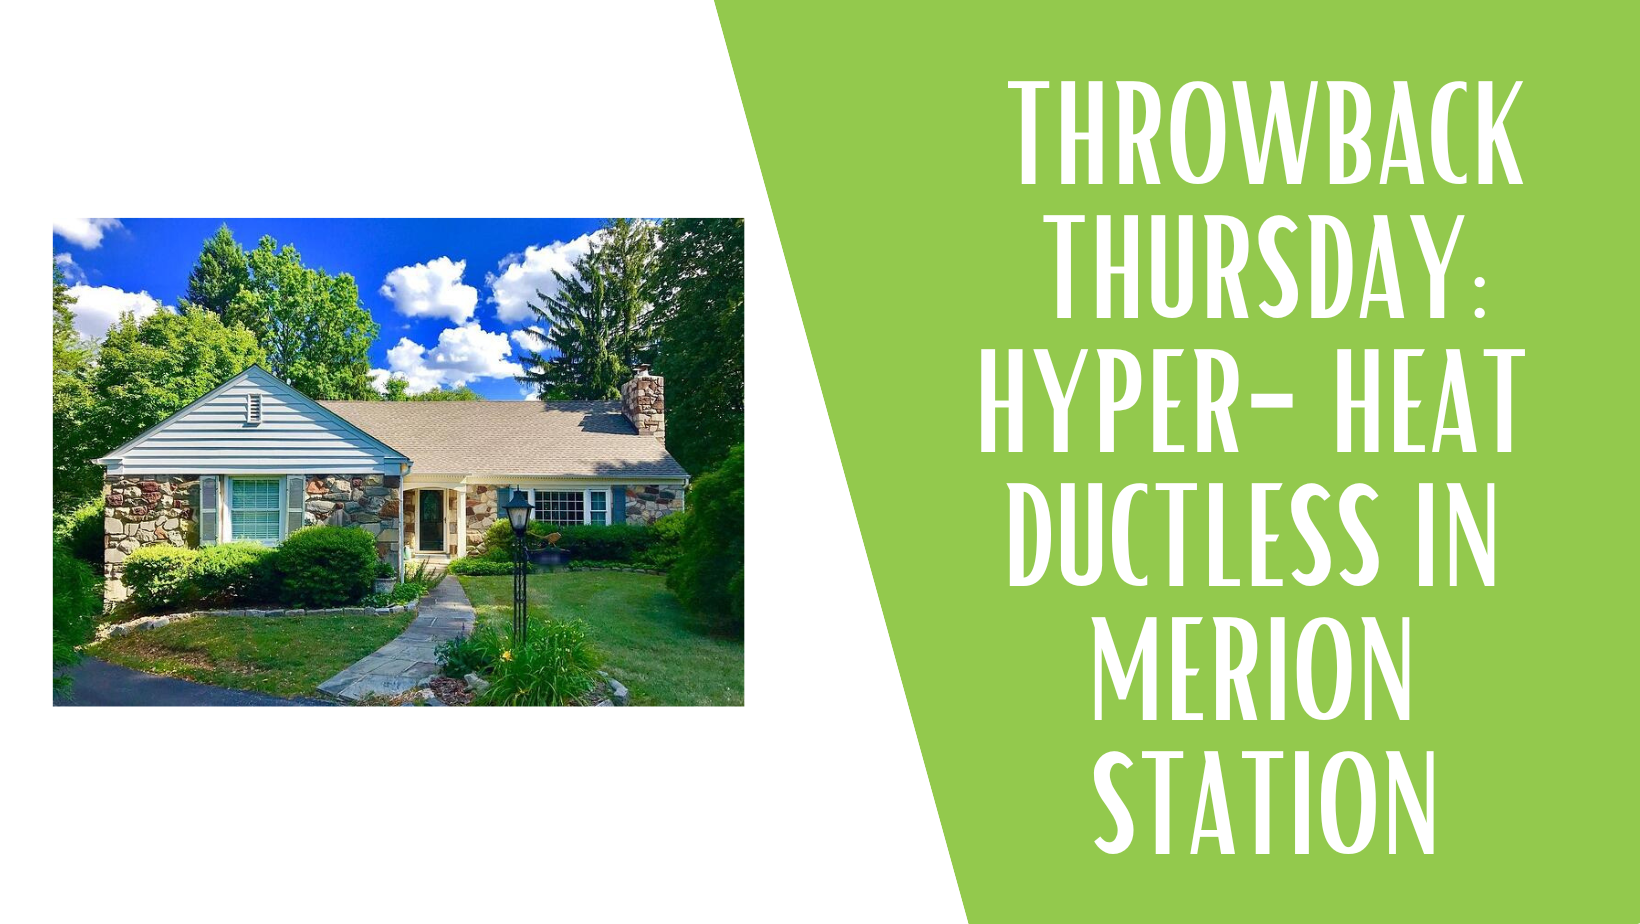 ECI upgrades Merion Station home comfort with Hyper-Heat ductless system